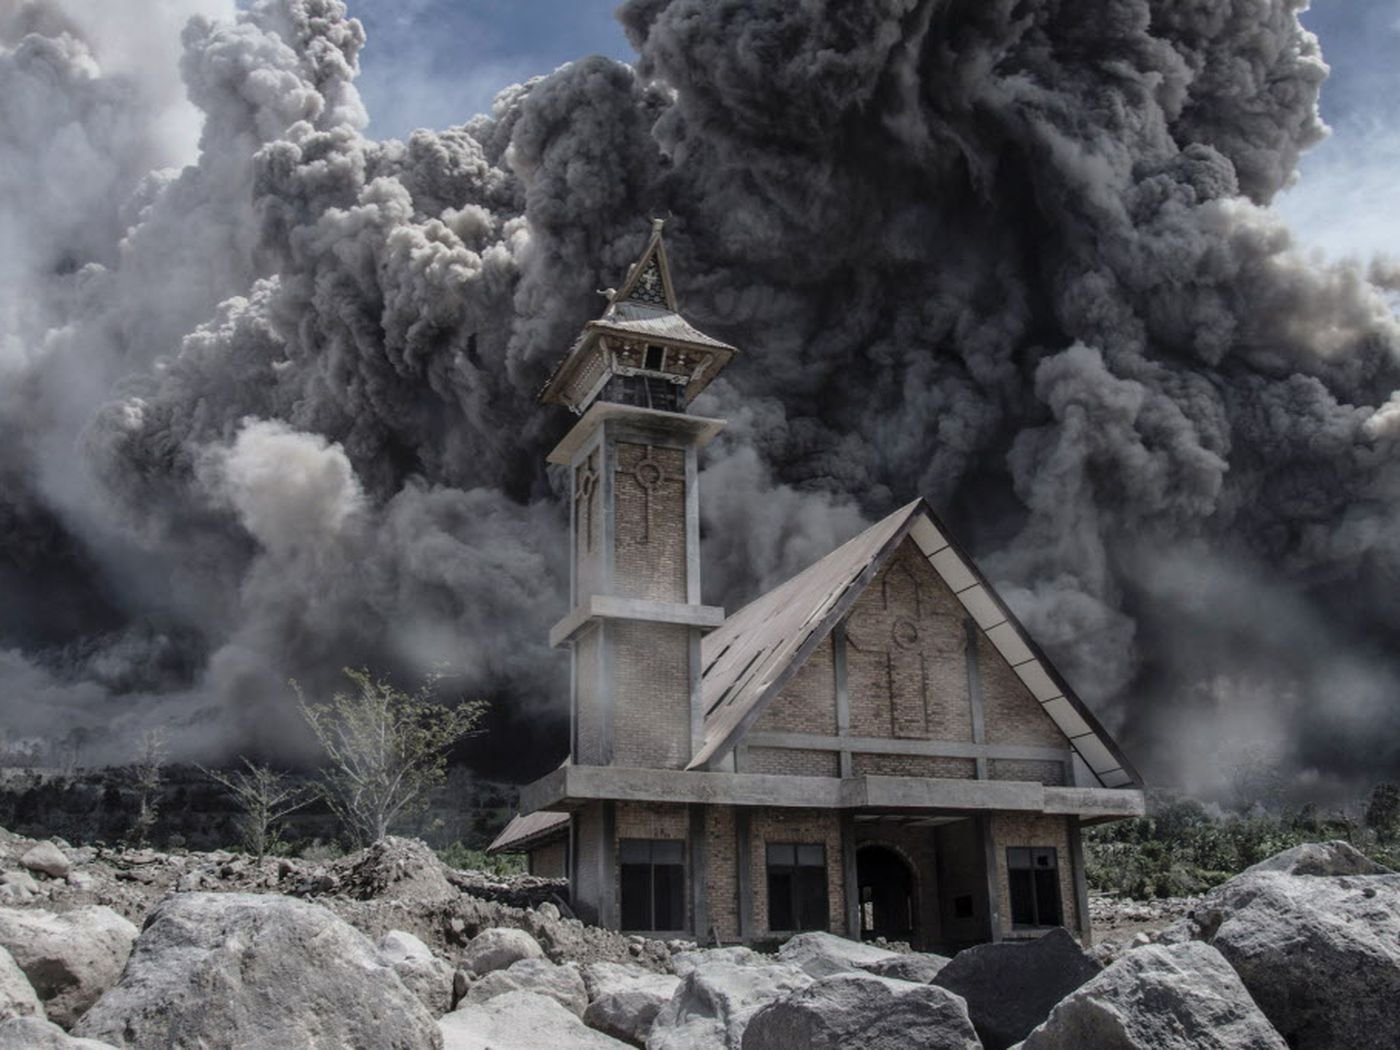 Sinabung volcano spews volcanic ash during eruption in Karo, North Sumatra province, Indonesia August 10, 2020 in this still image obtained from social media.